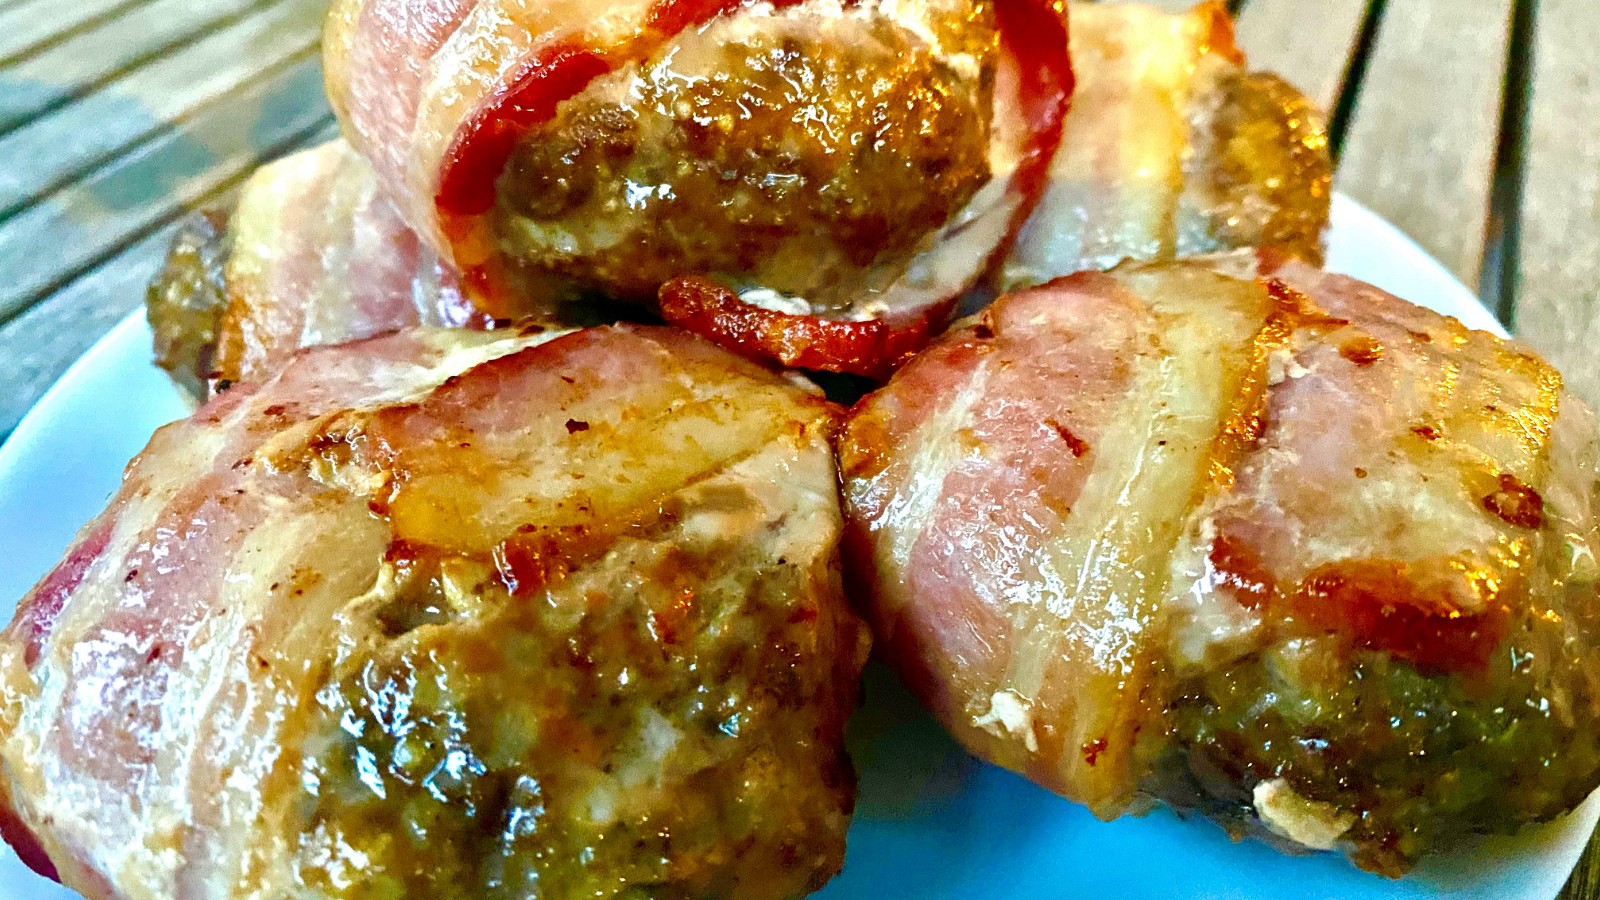 Image of Bacon Wrapped Burgers